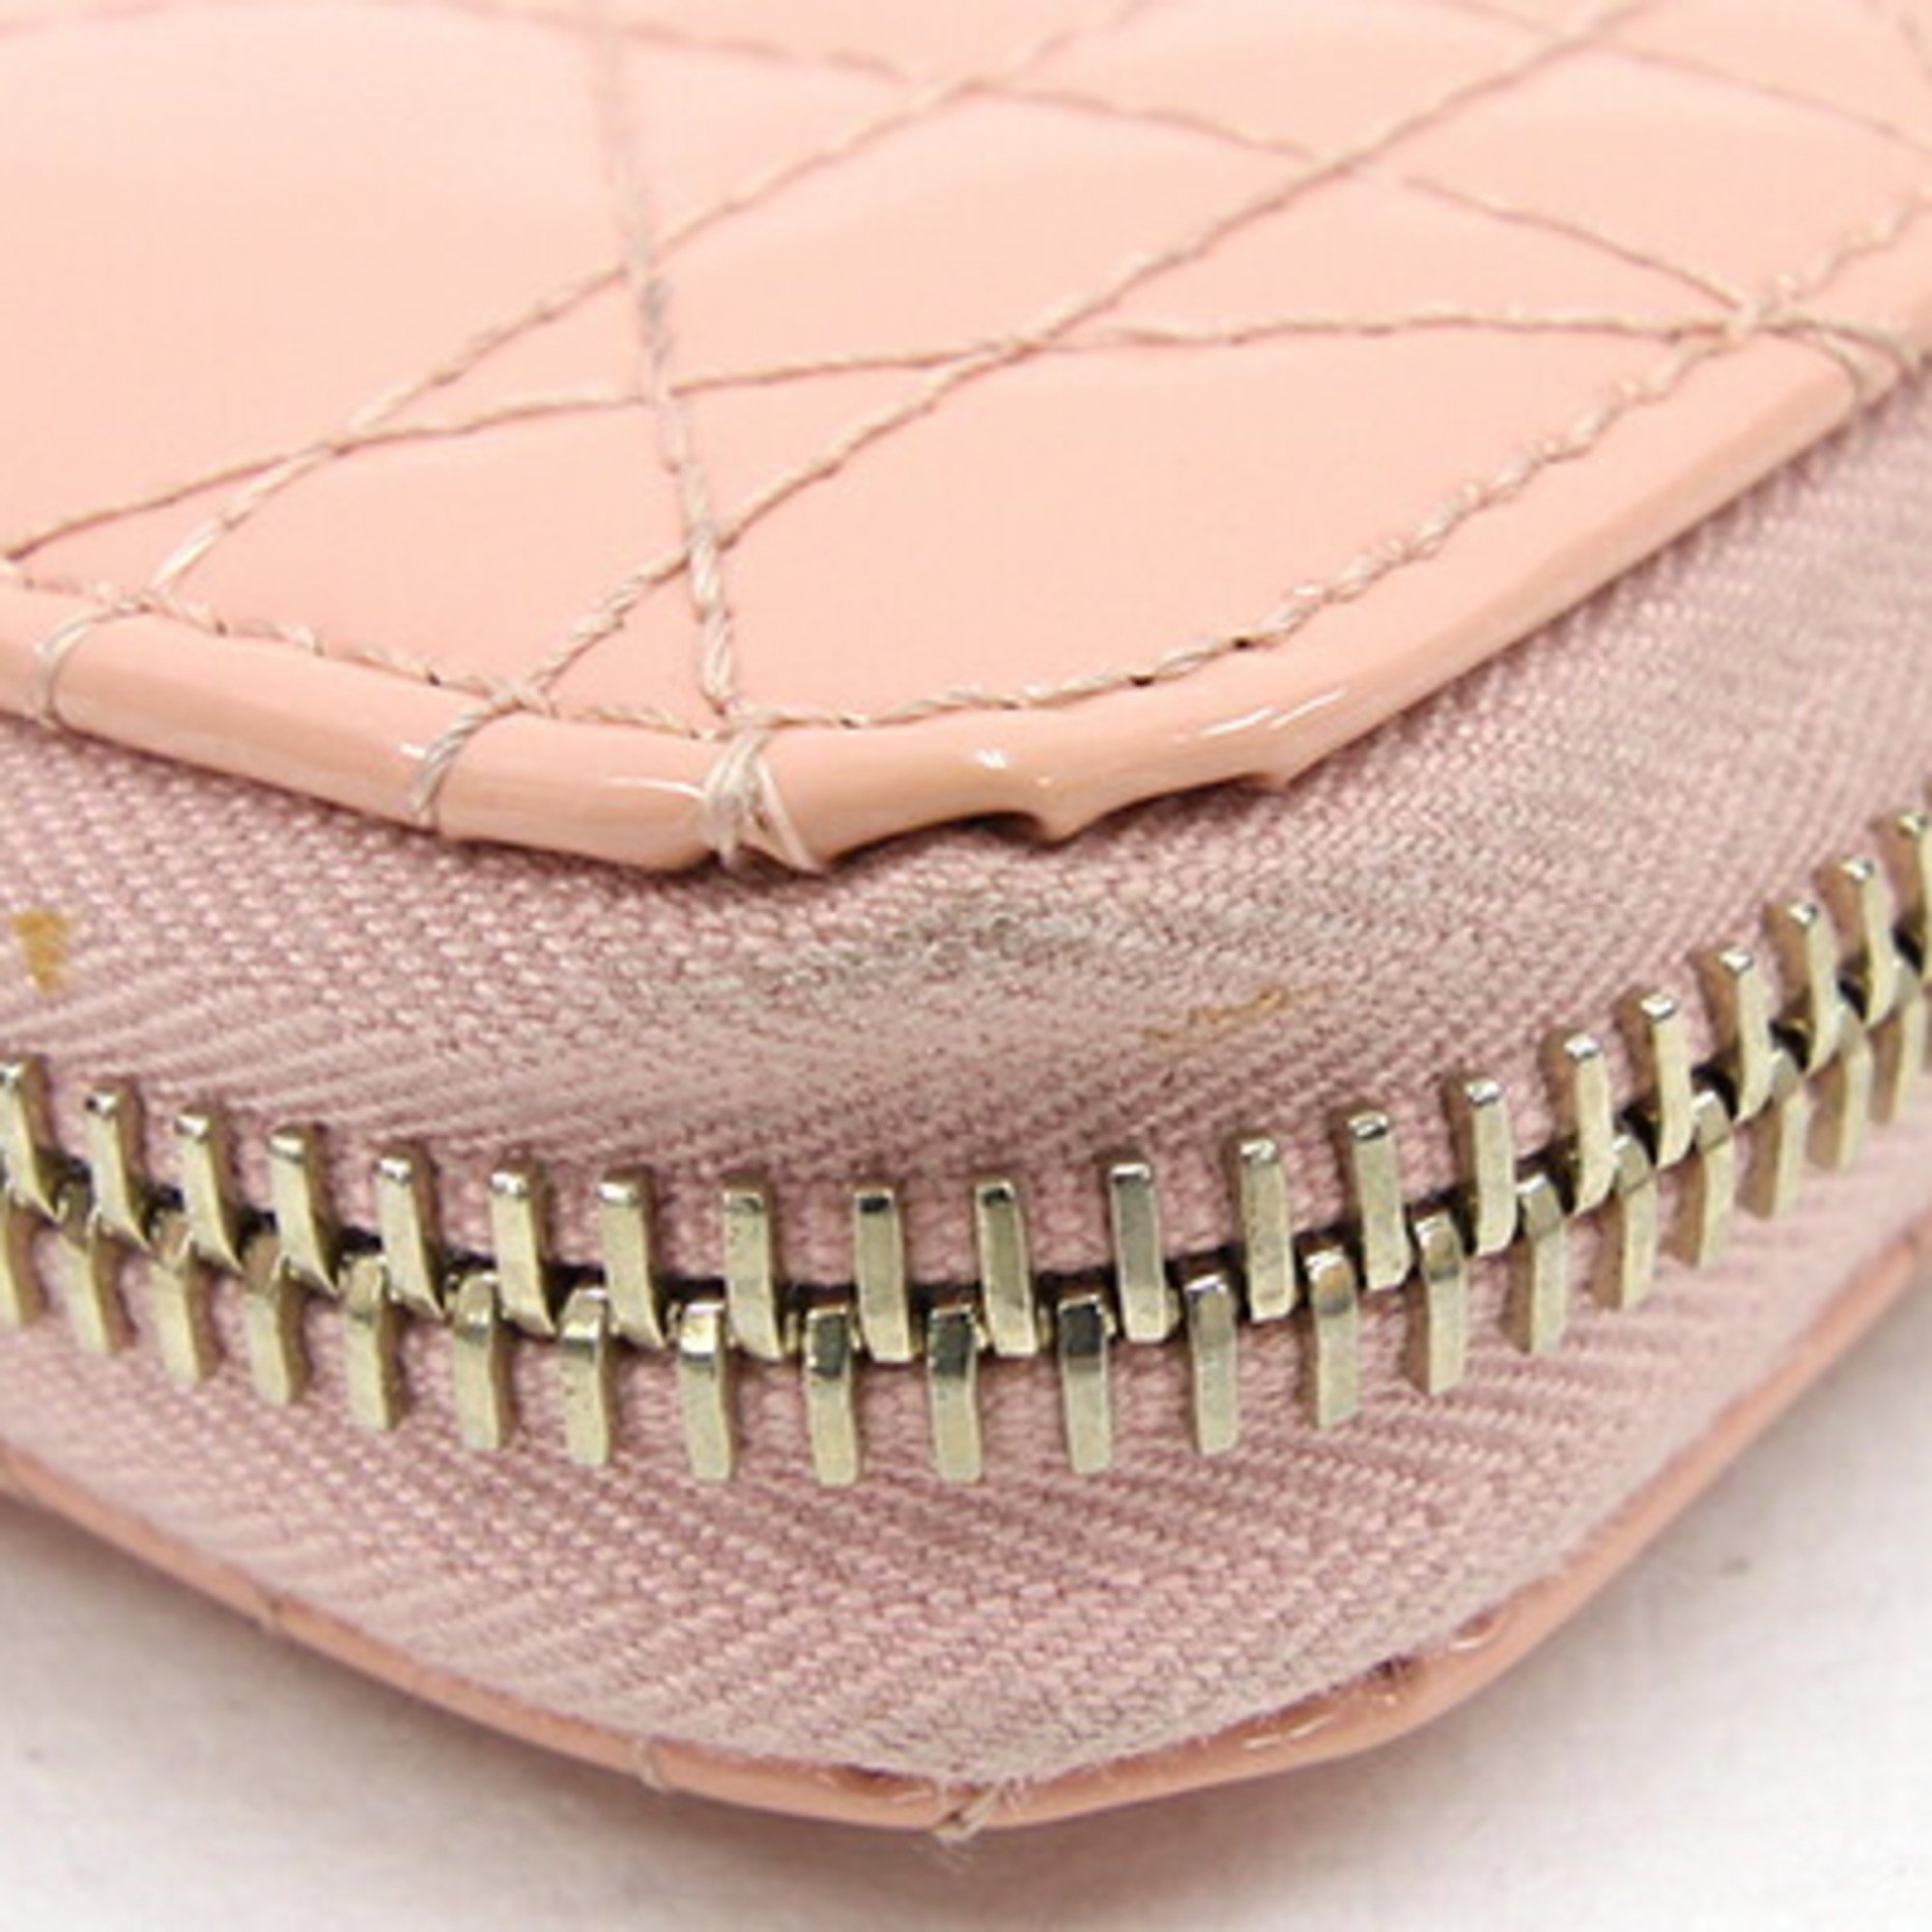 Christian Dior Dior Round Long Wallet Lady Voyageur S0007OVRB Pink Patent Leather Stitching Quilting Enamel Cannage Ladies Christian